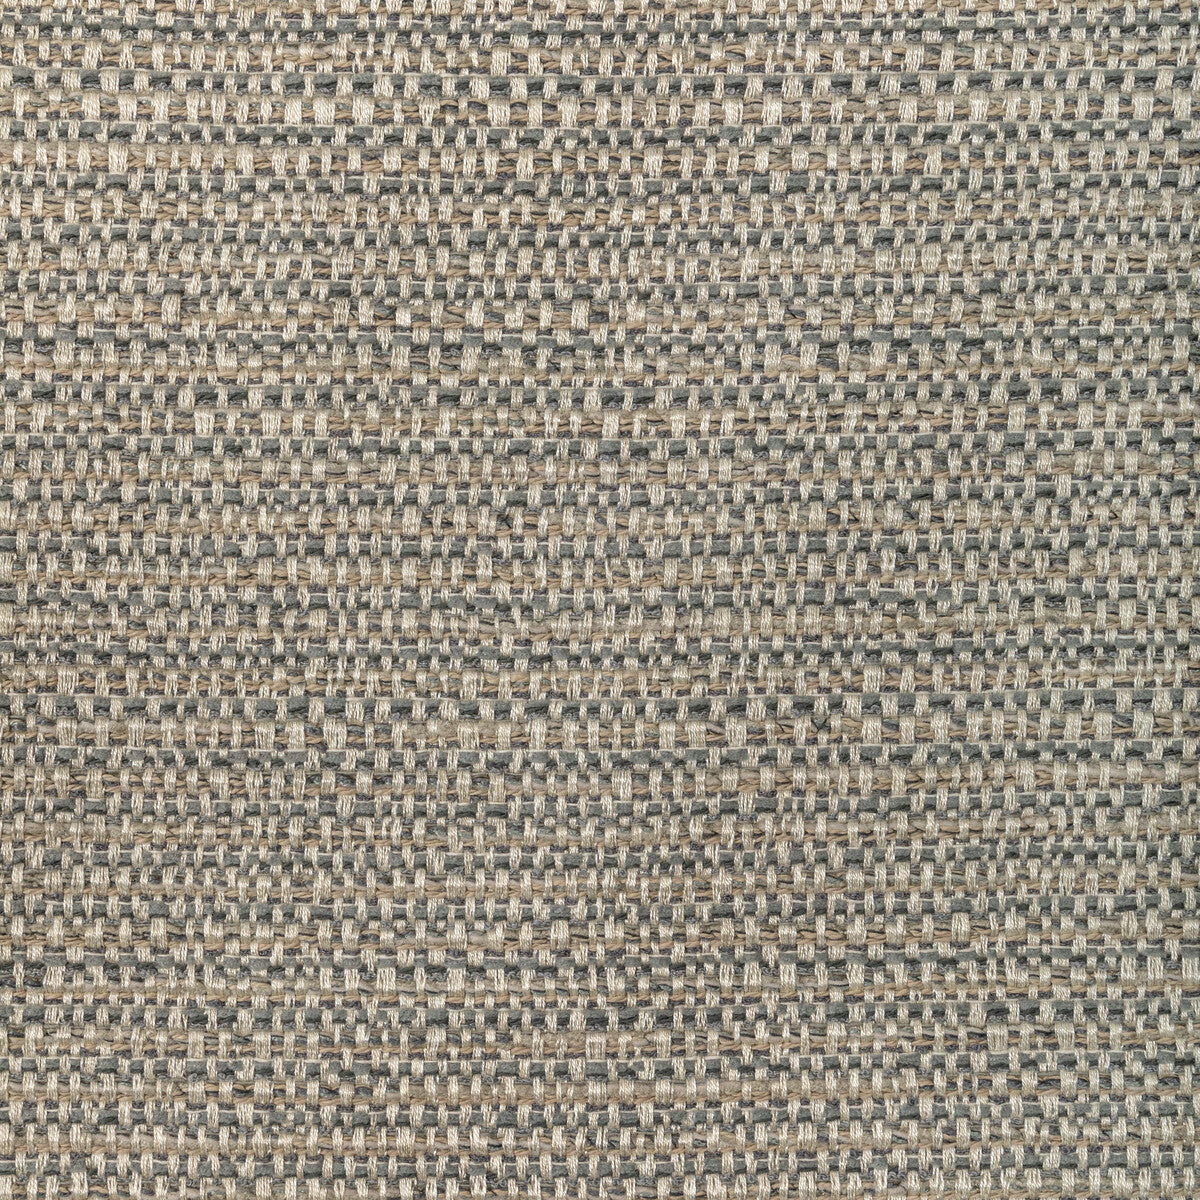 Kravet Design fabric in 36417-11 color - pattern 36417.11.0 - by Kravet Design in the Performance Crypton Home collection